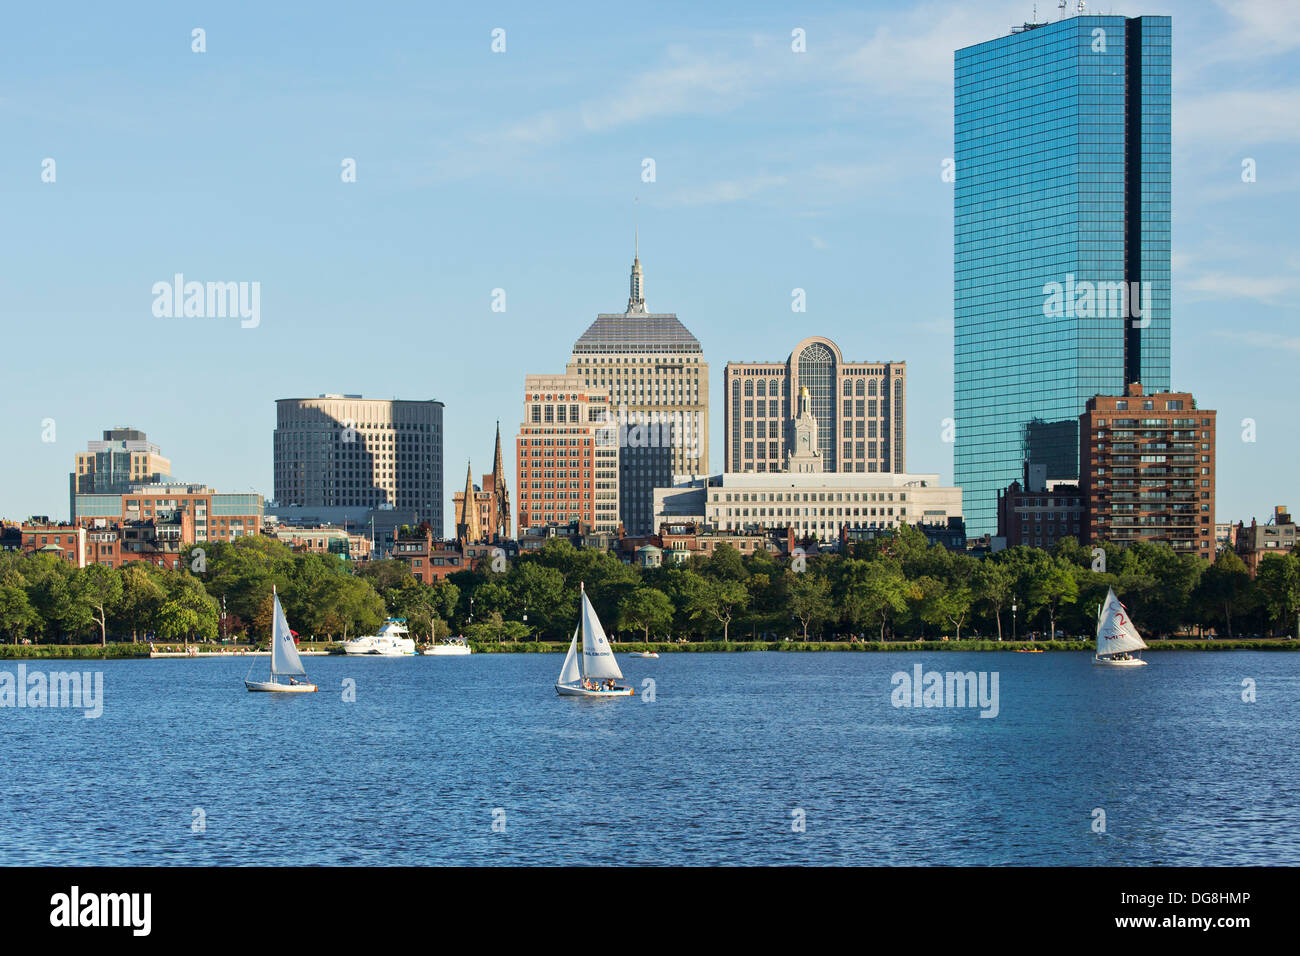 Skyline (200 Clarenton, formerly known as Hancock Tower in glass) and sailboats on Charles River, Boston, Massachusetts USA Stock Photo